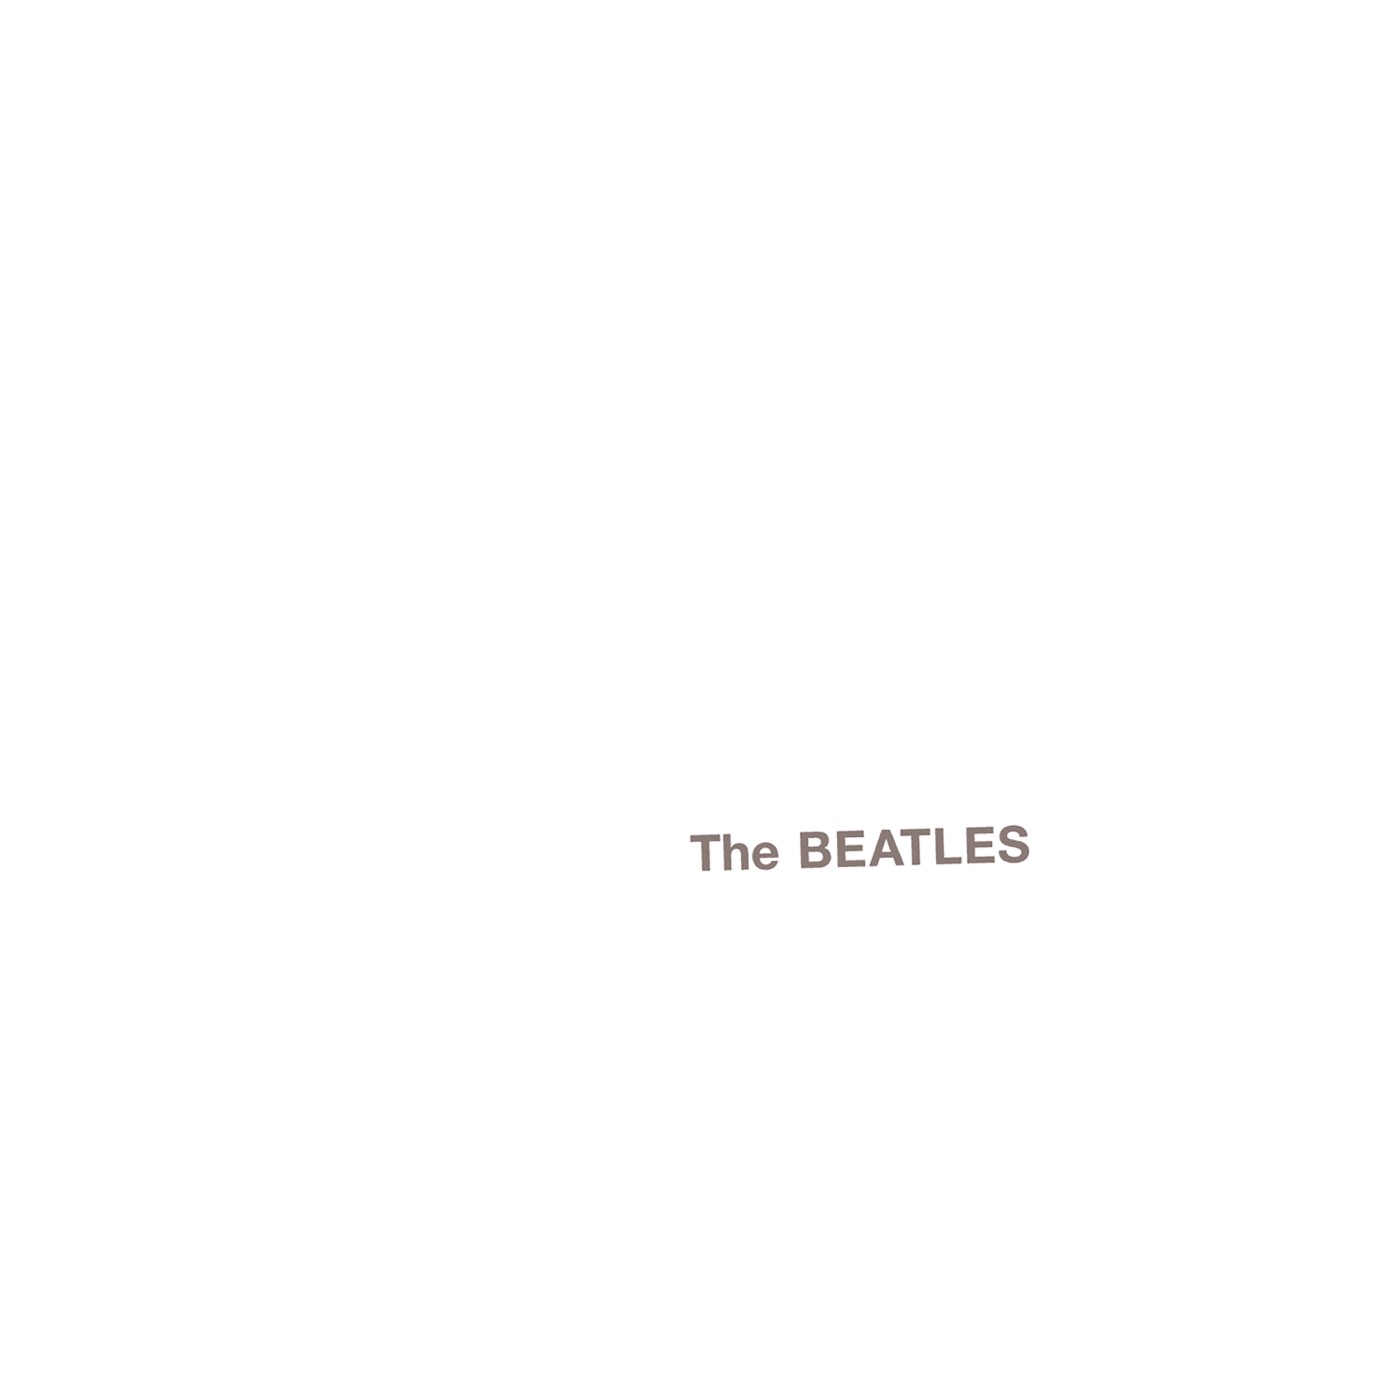 The Beatles (White Album / Super Deluxe) by The Beatles